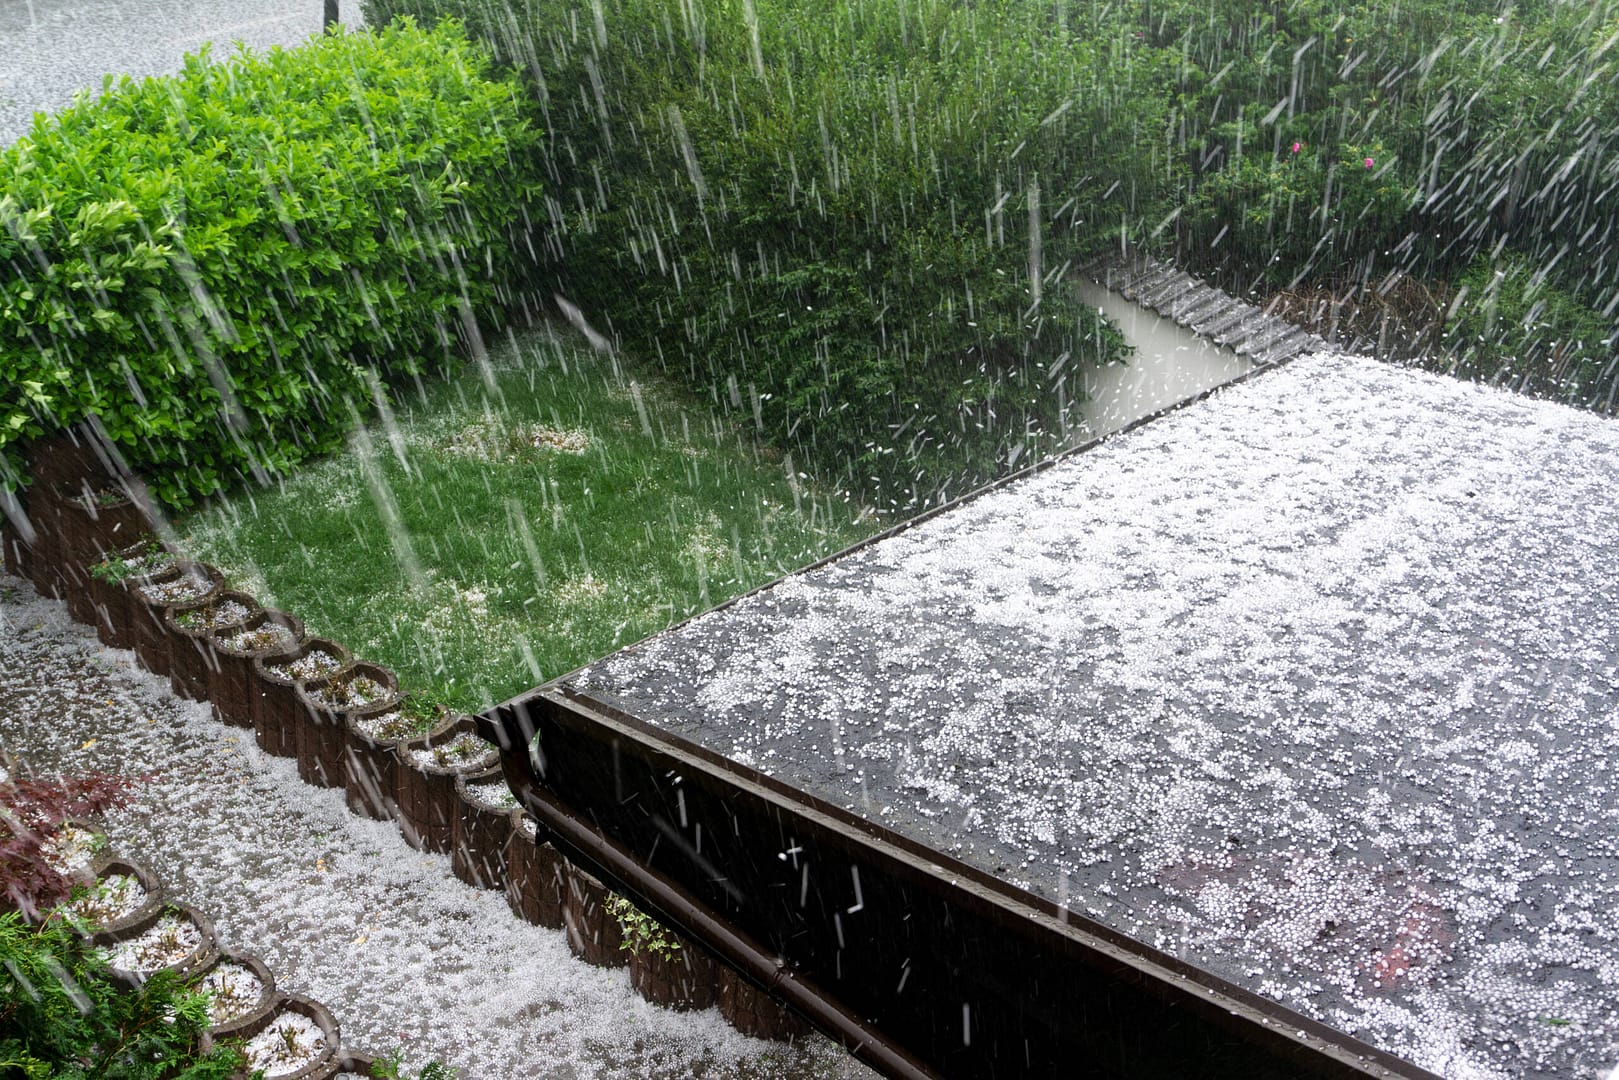 Hail falling onto a roof during a severe thunderstorm in Township, NJ.